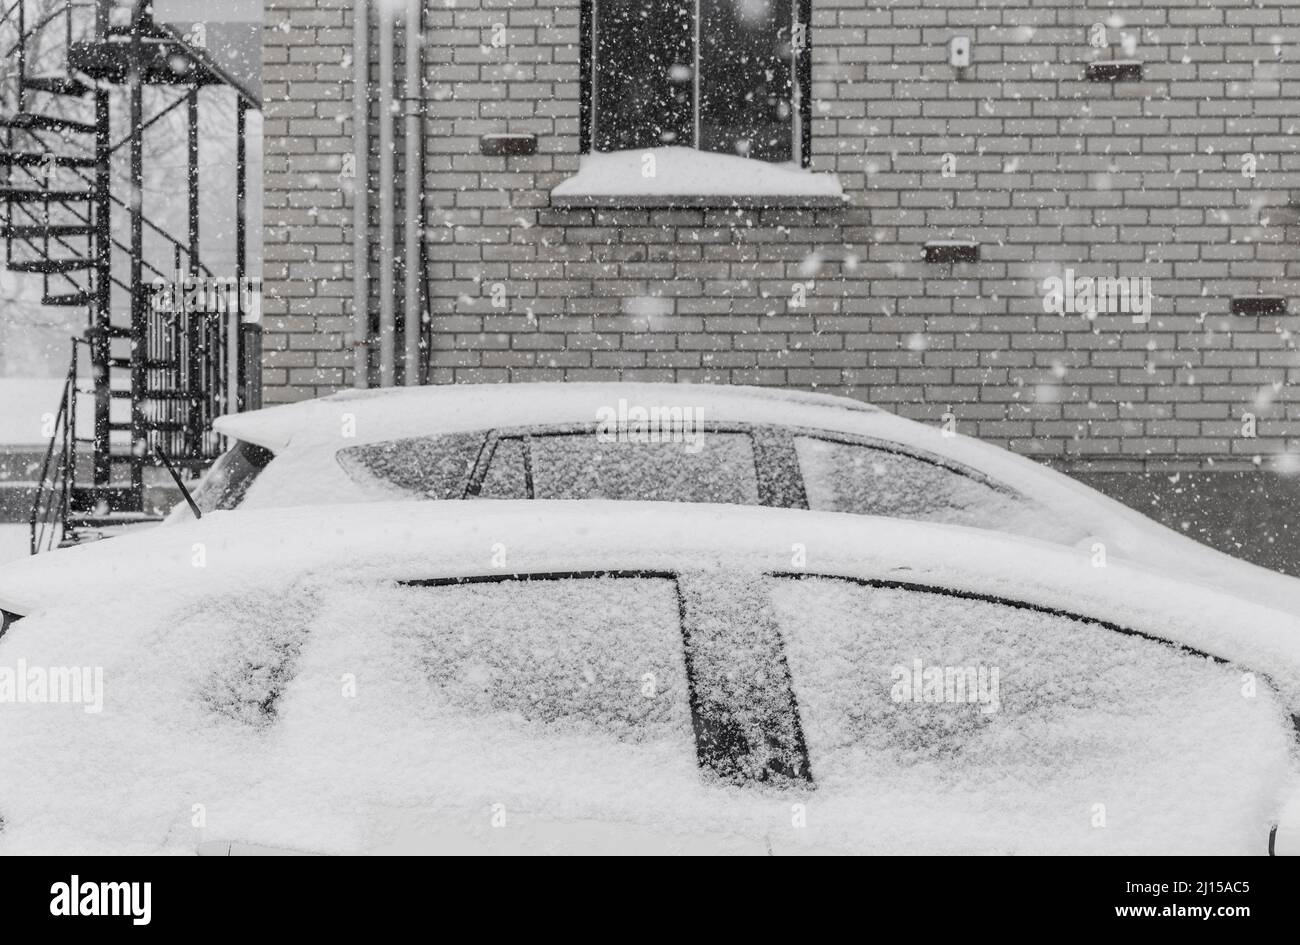 Parked cars during a winter snowstorm, in Longueuil, Quebec, Canada Stock Photo